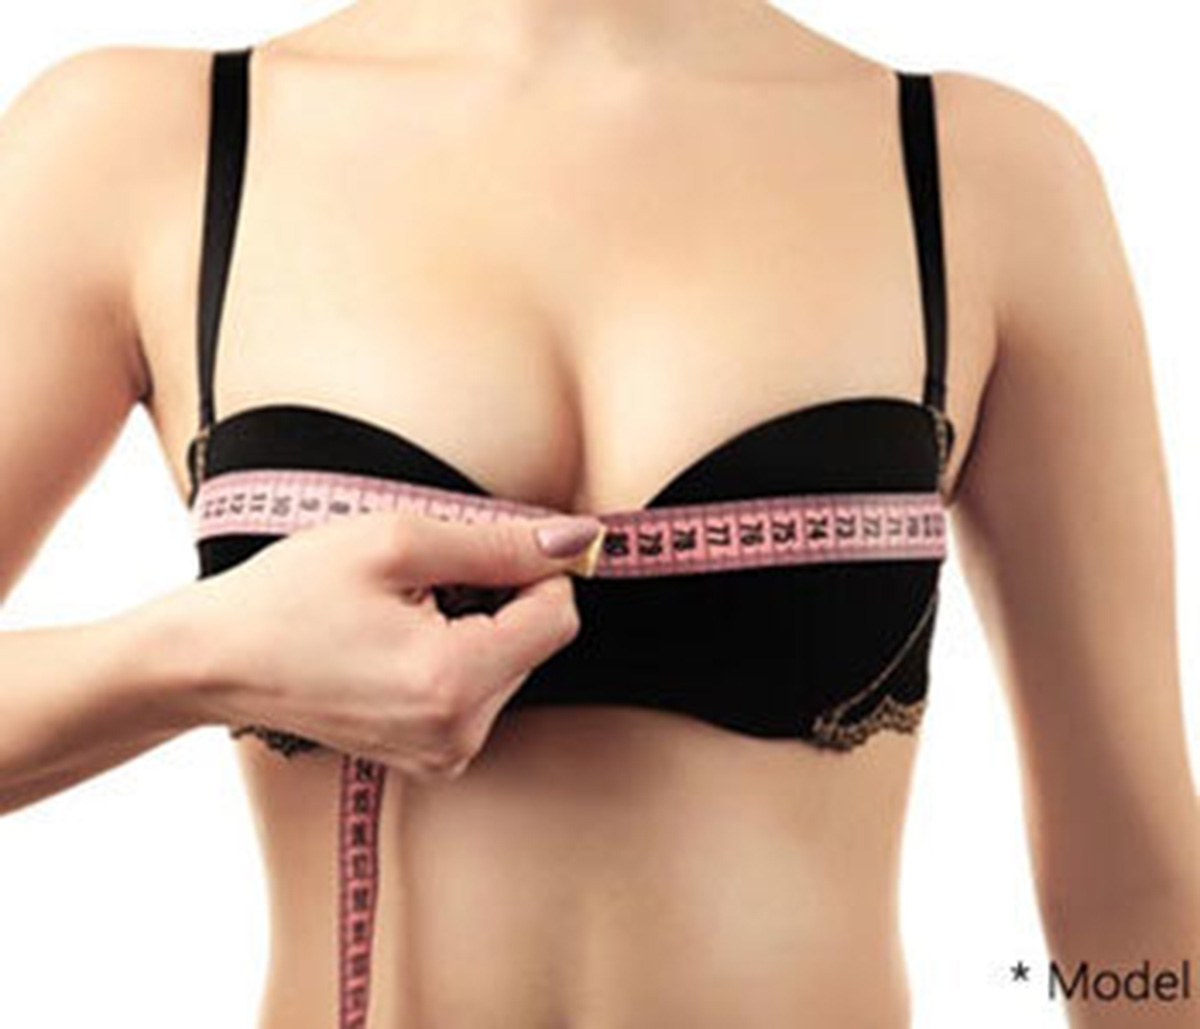 Breast Augmentation Surgery Beverly Hills - What To Expect